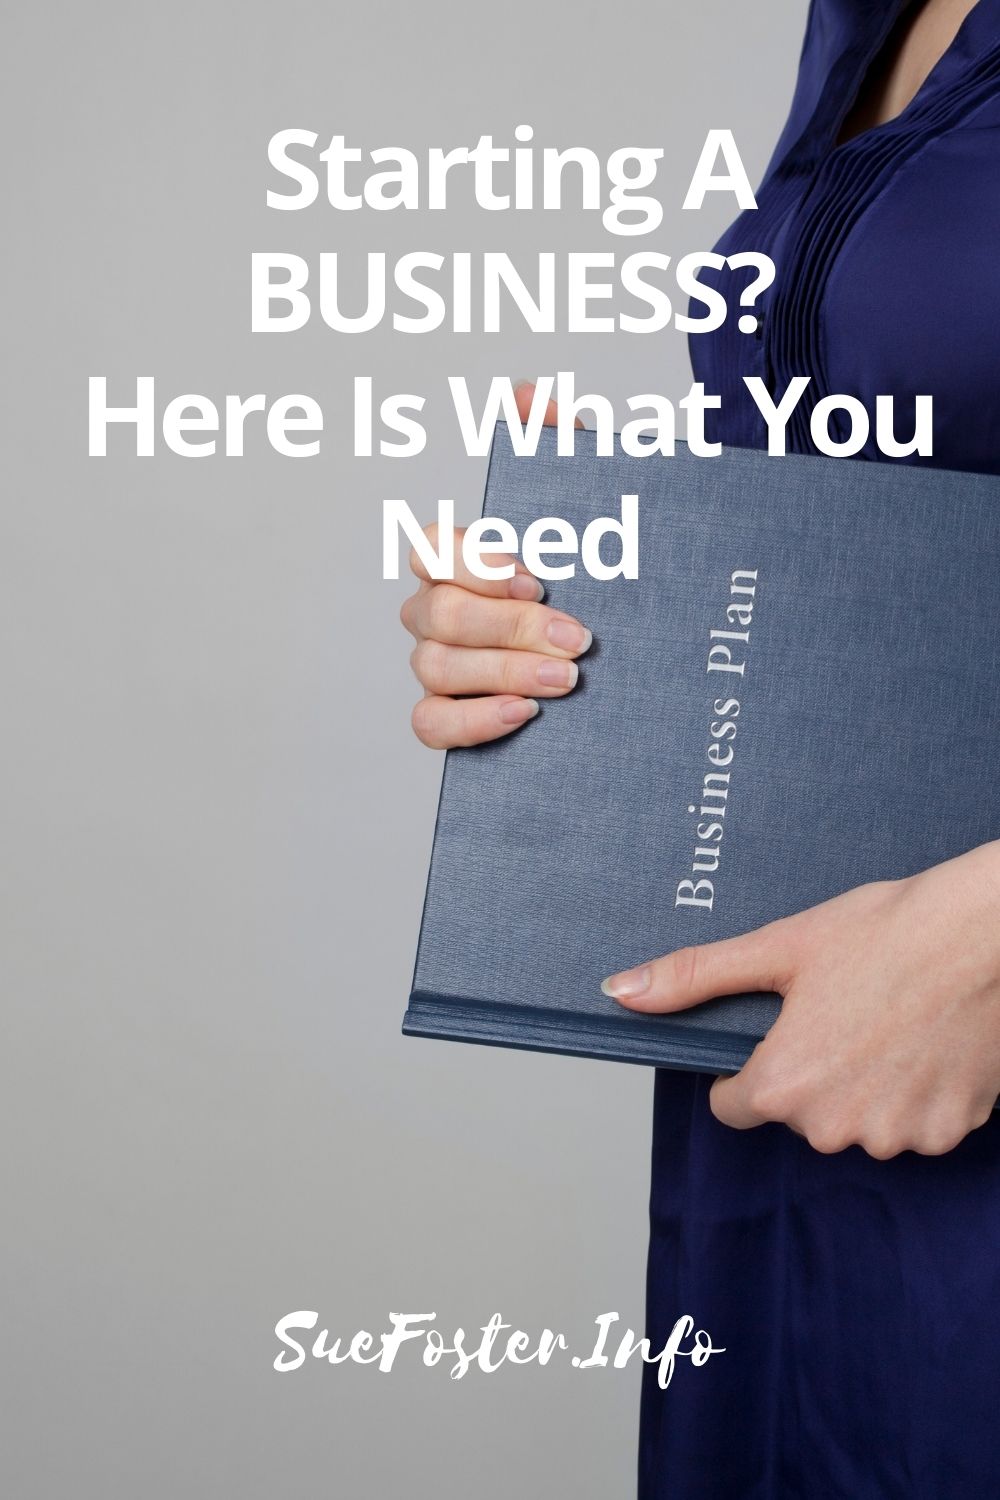 Every small business owner needs these five departments.